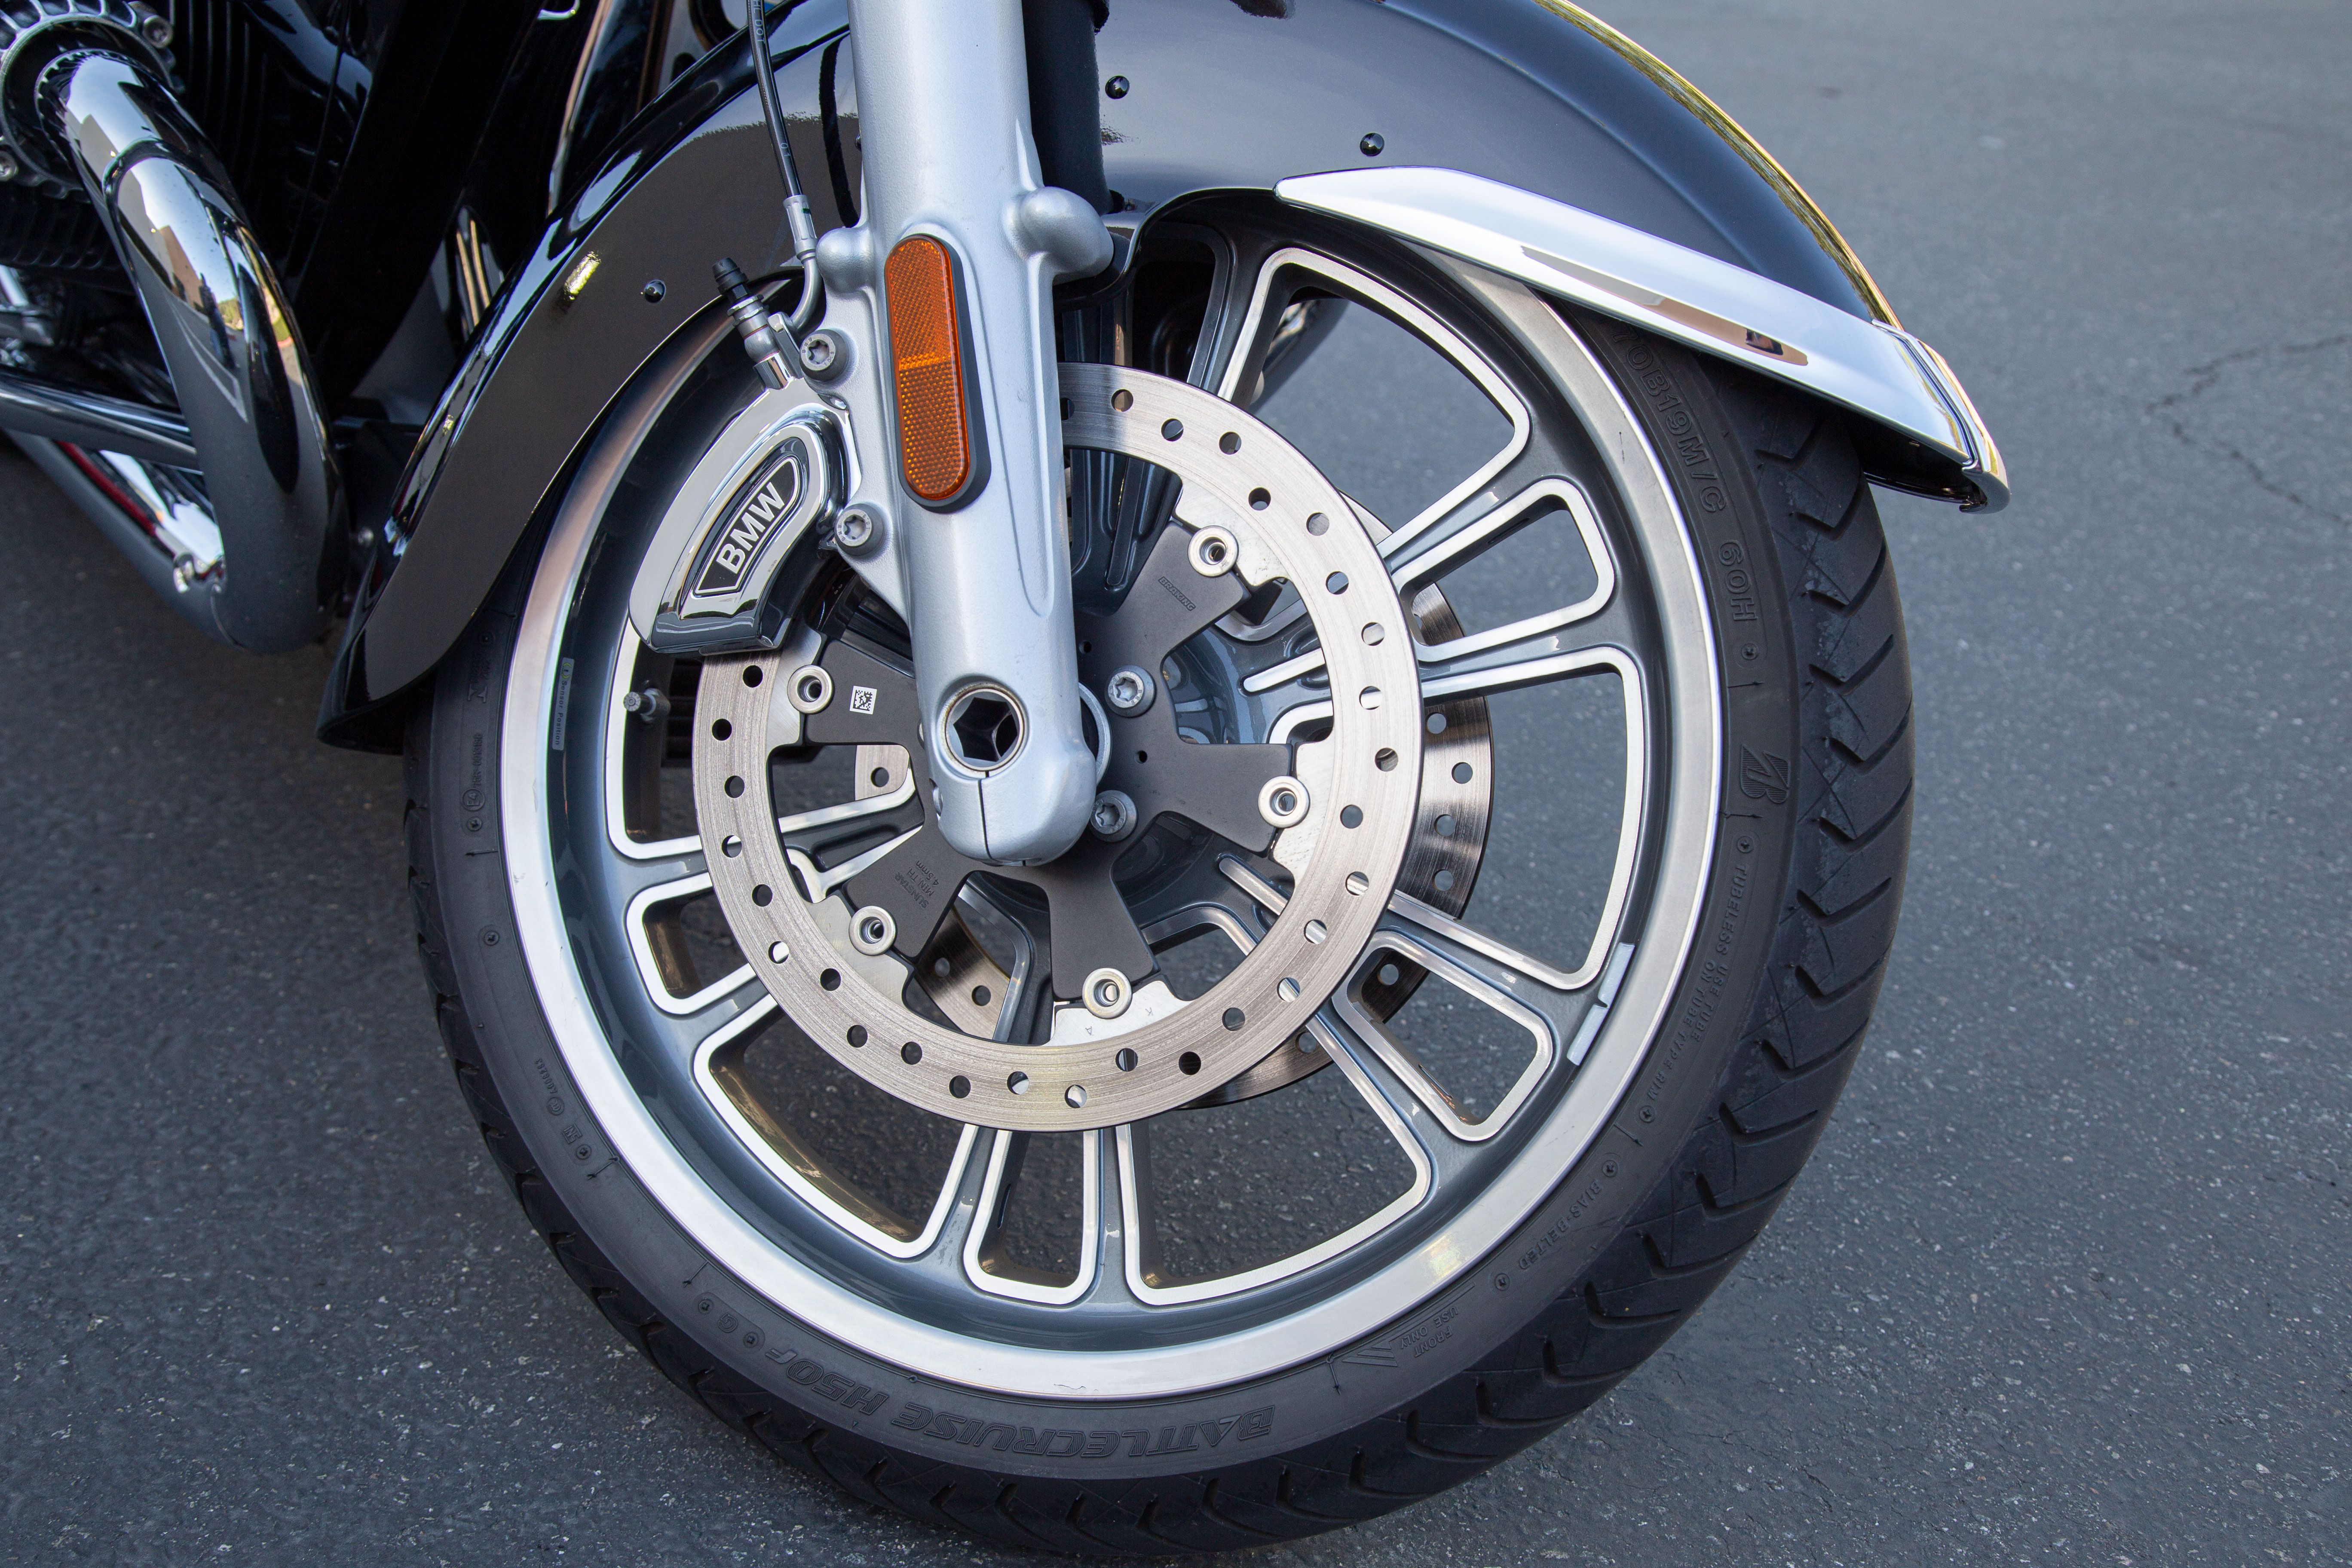 2022 BMW R18 Transcontinental Motorcycle Front Wheel